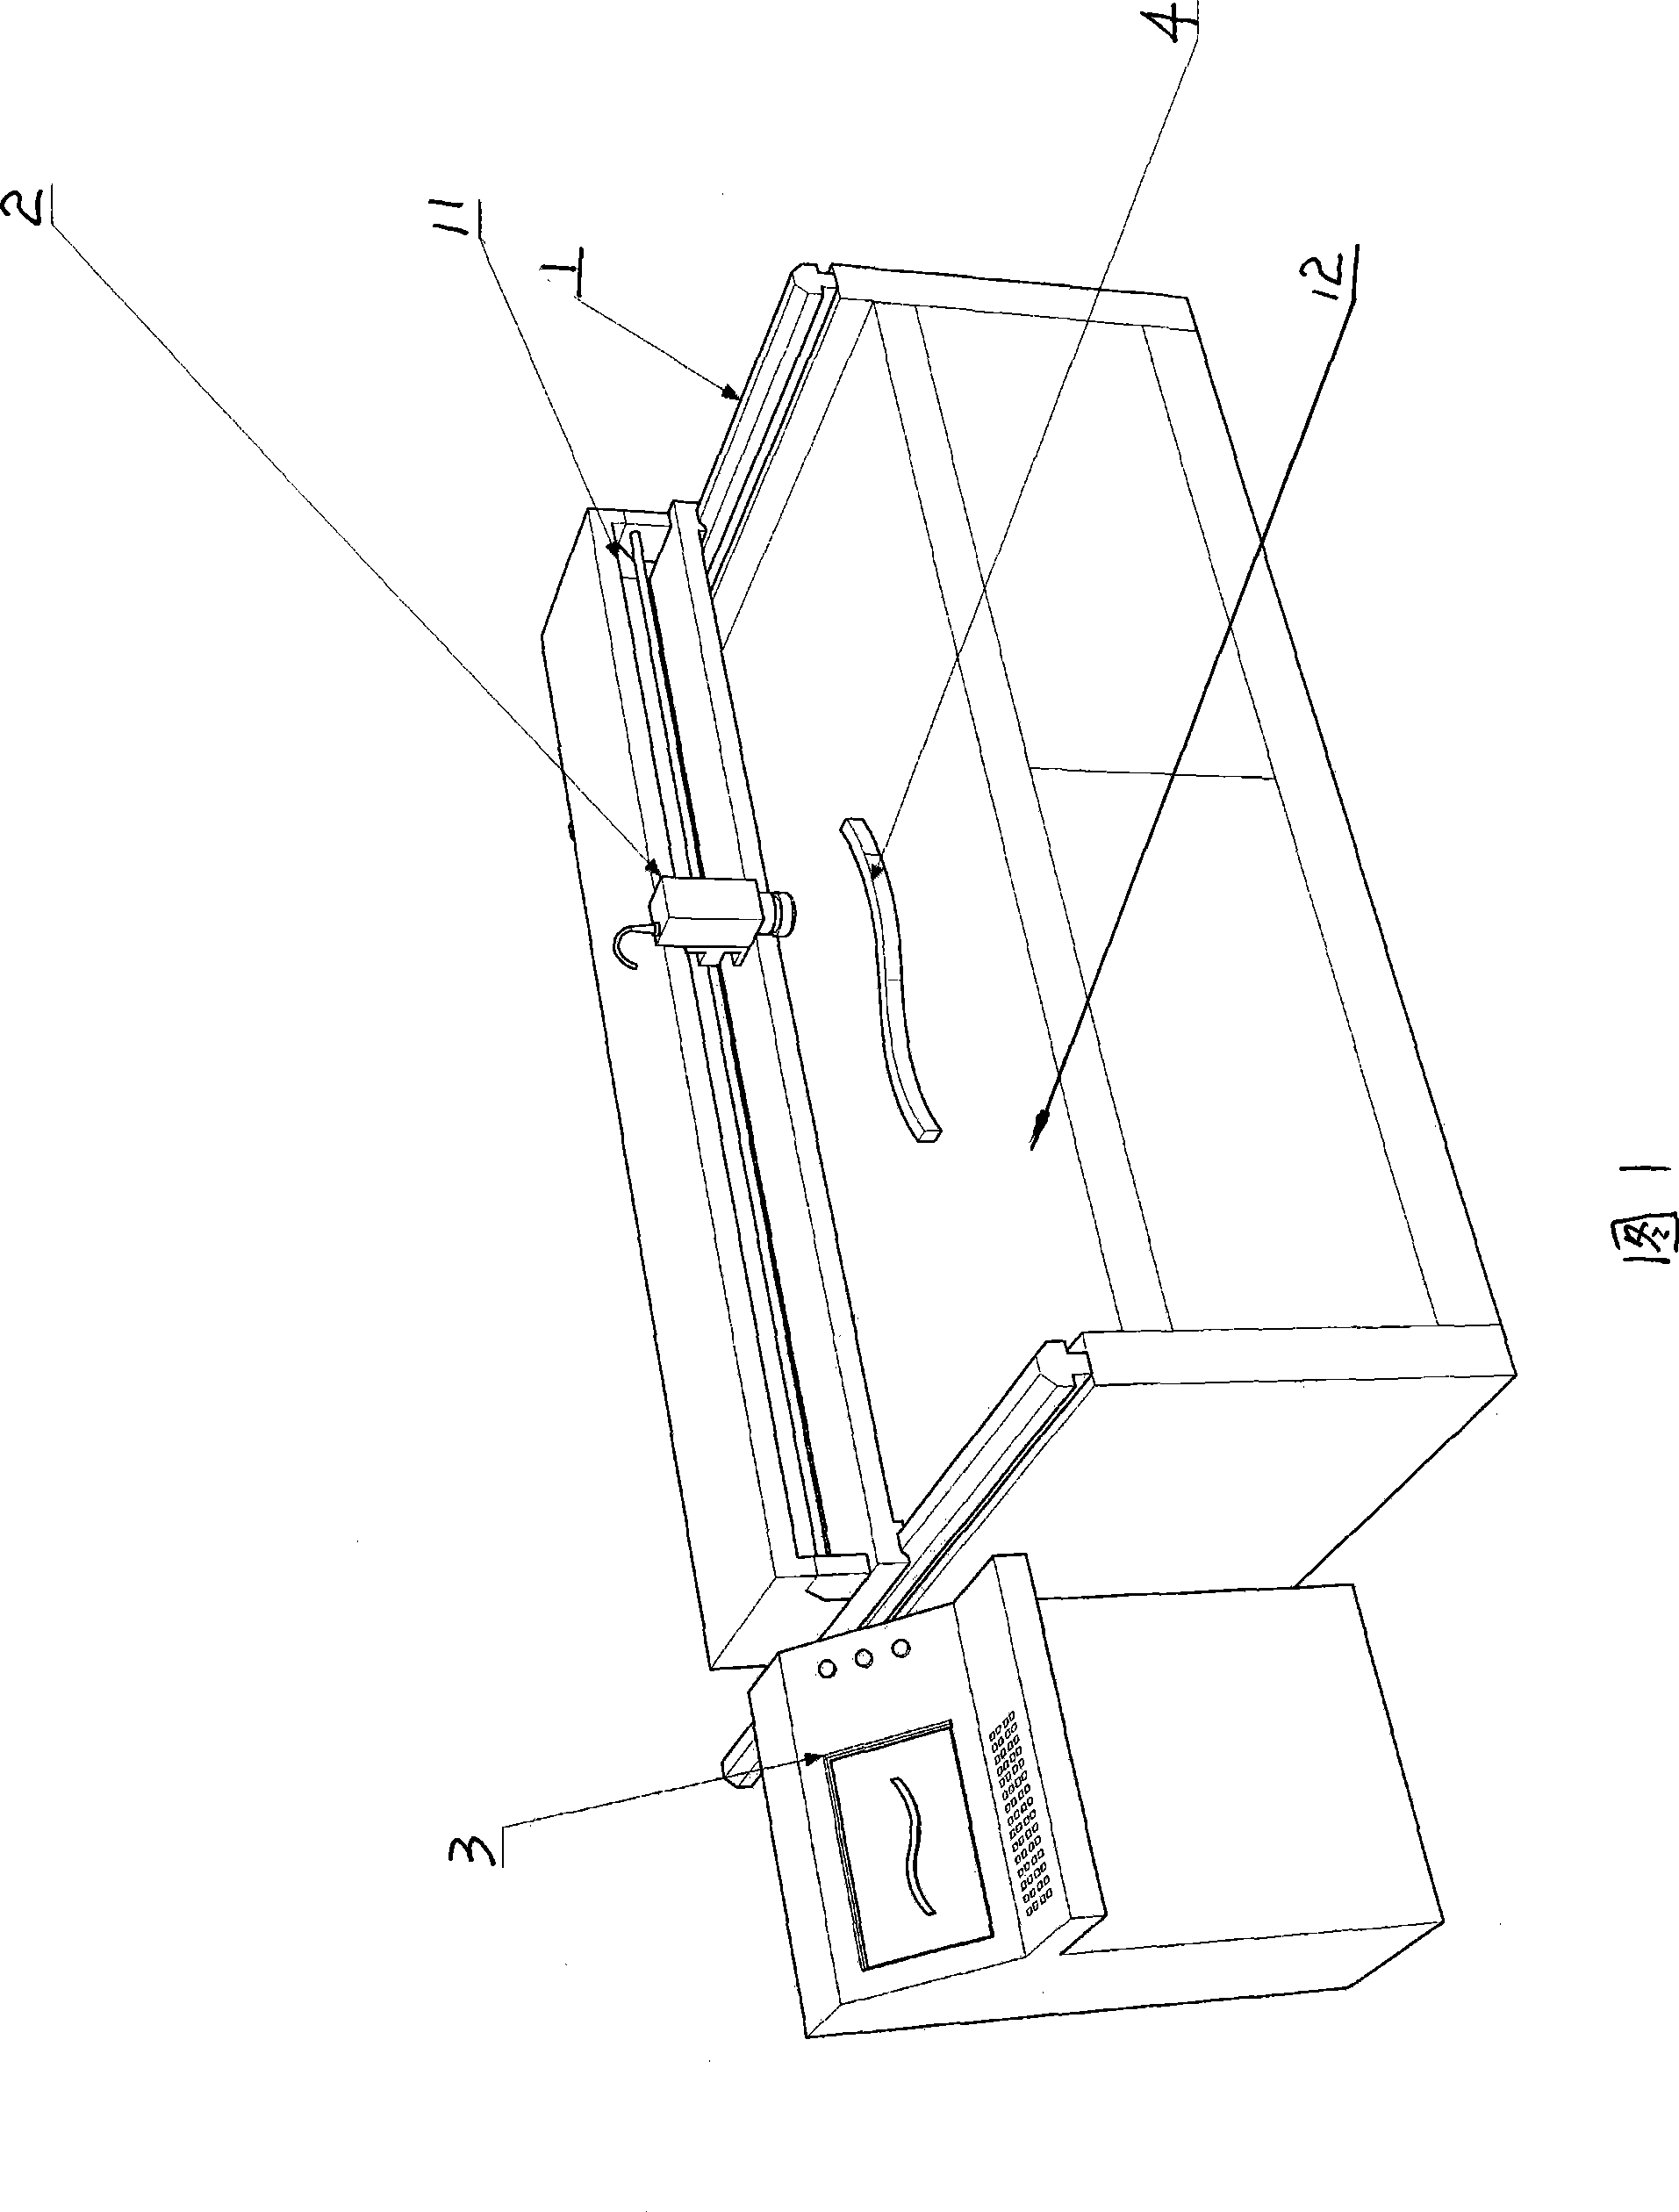 Datamation mapping method applying to flat pattern workpieces